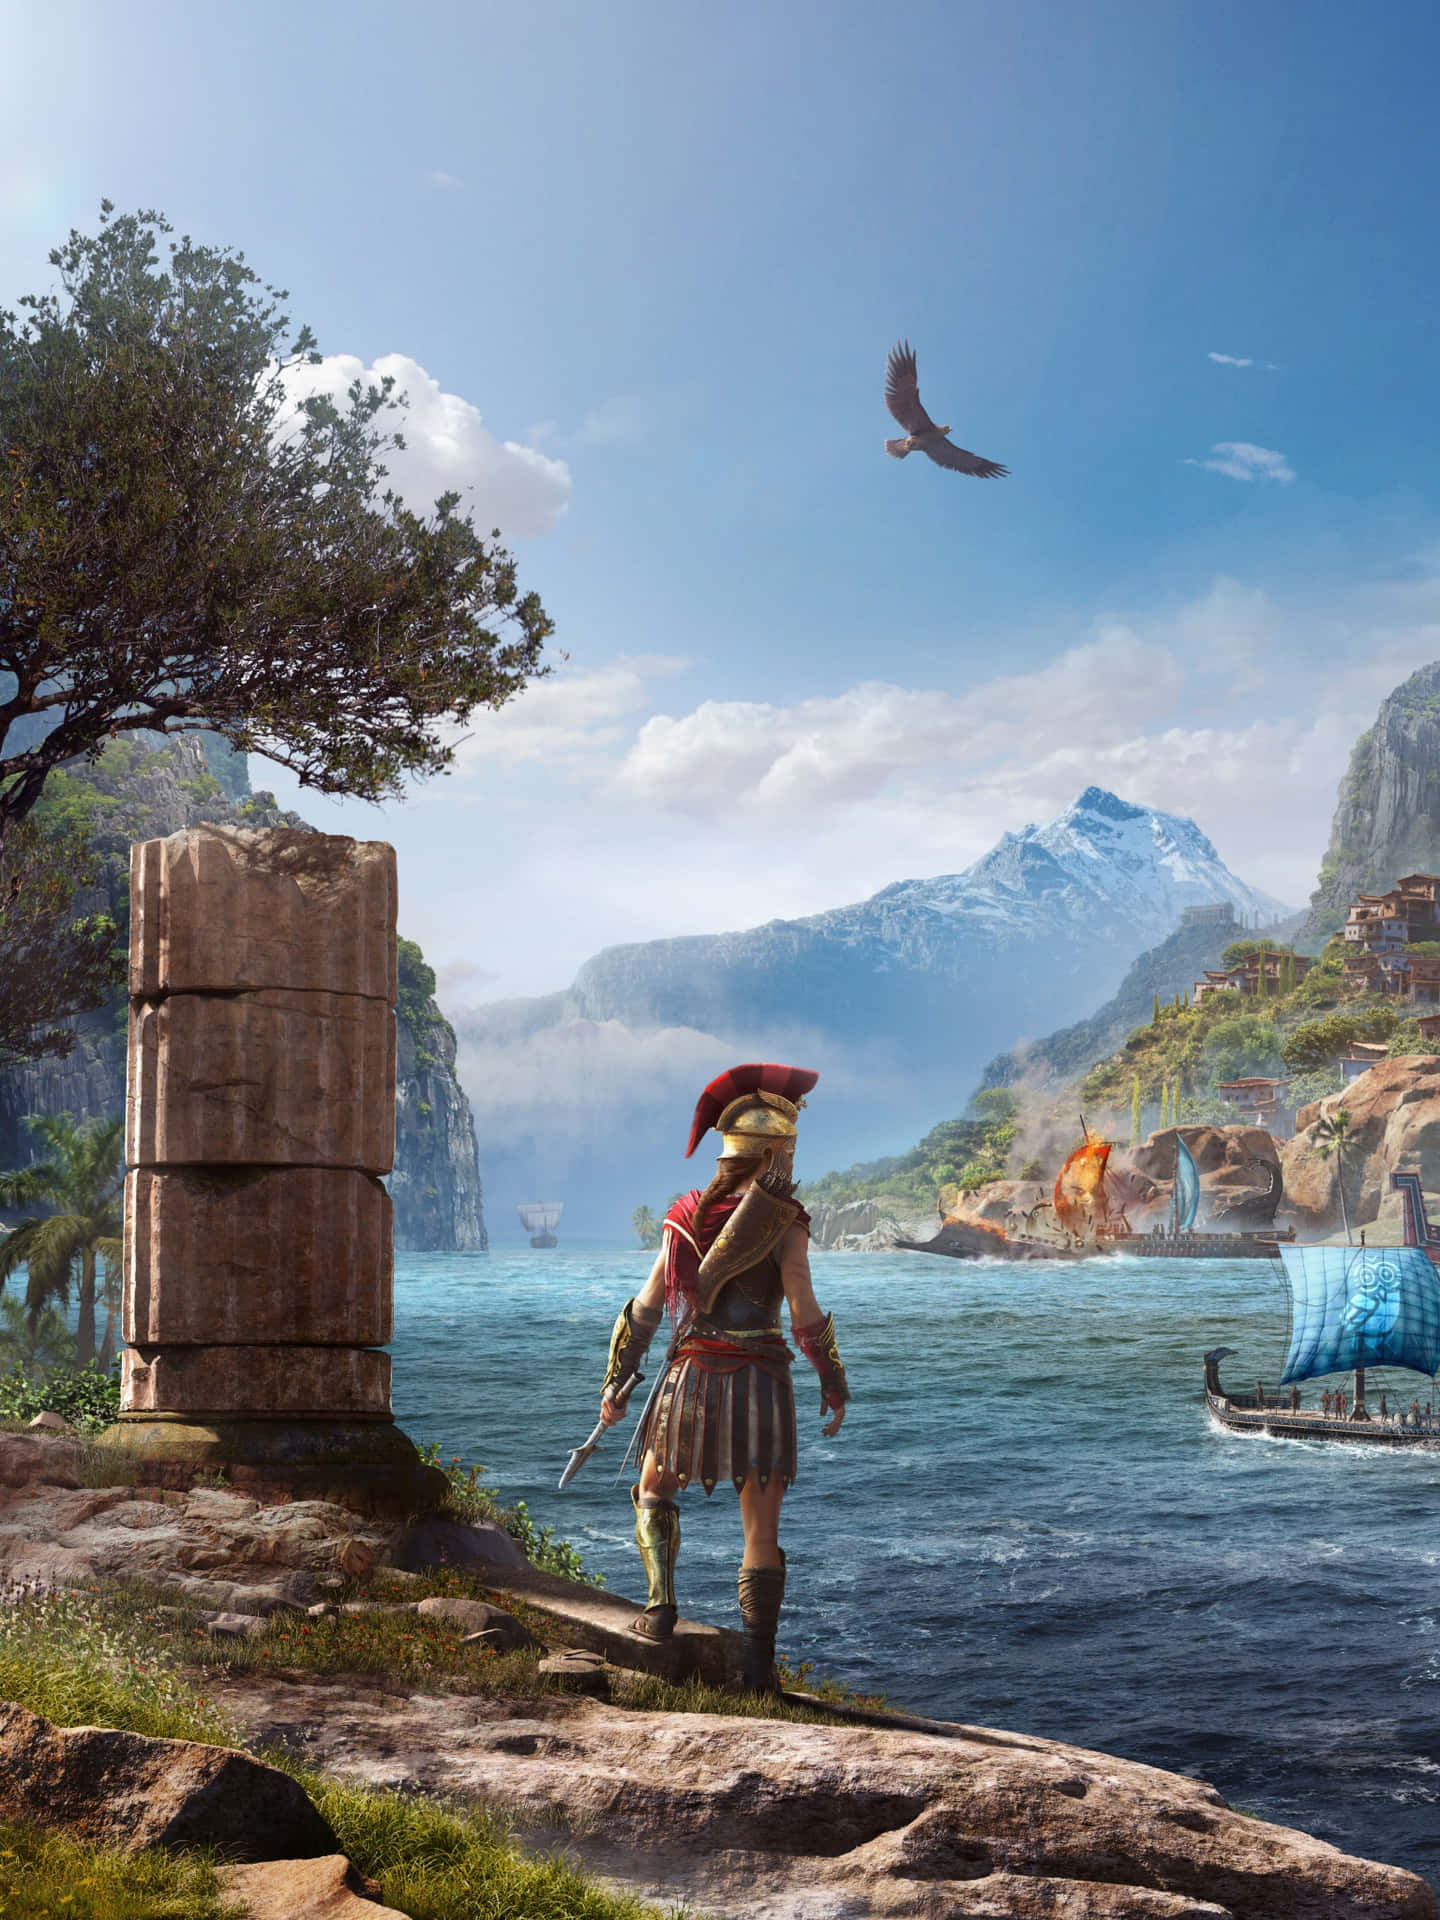 Assassin's Creed Odyssey Background&Flying Eagle